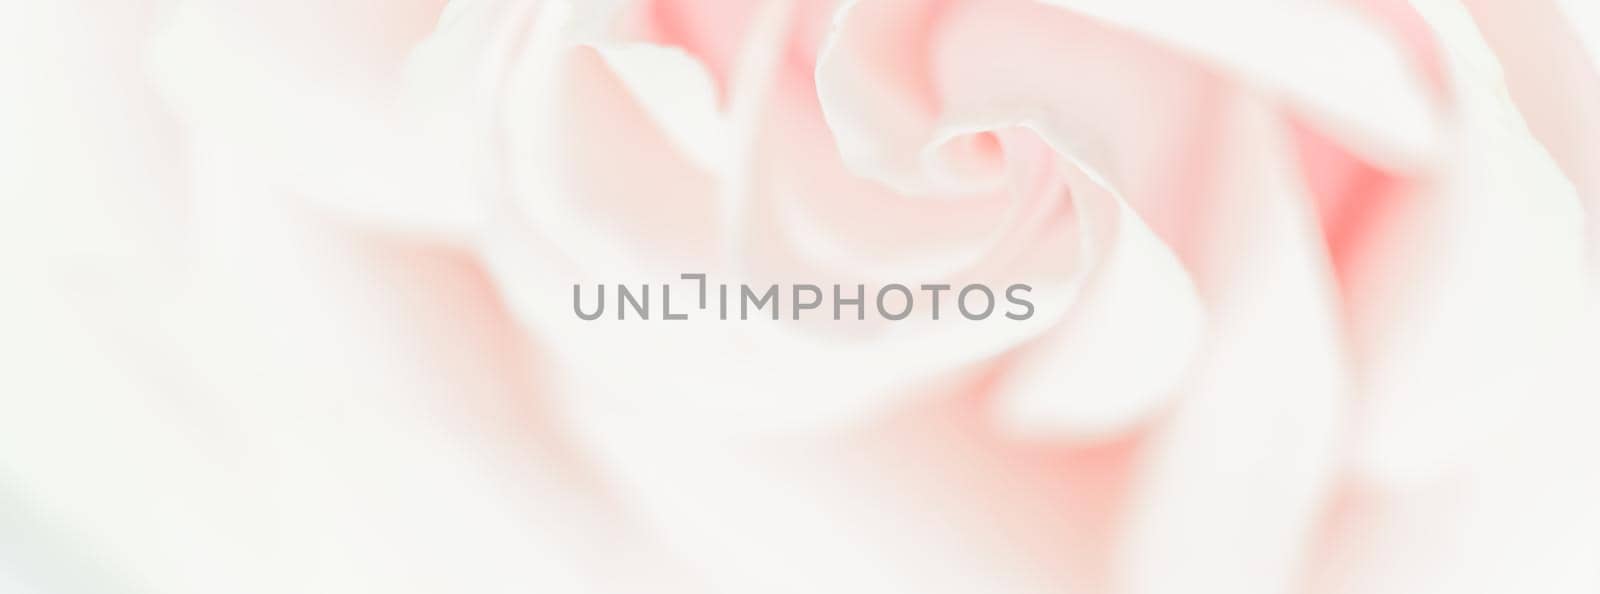 Botanical concept, wedding invitation card - Soft focus, abstract floral background, pink rose flower. Macro flowers backdrop for holiday brand design